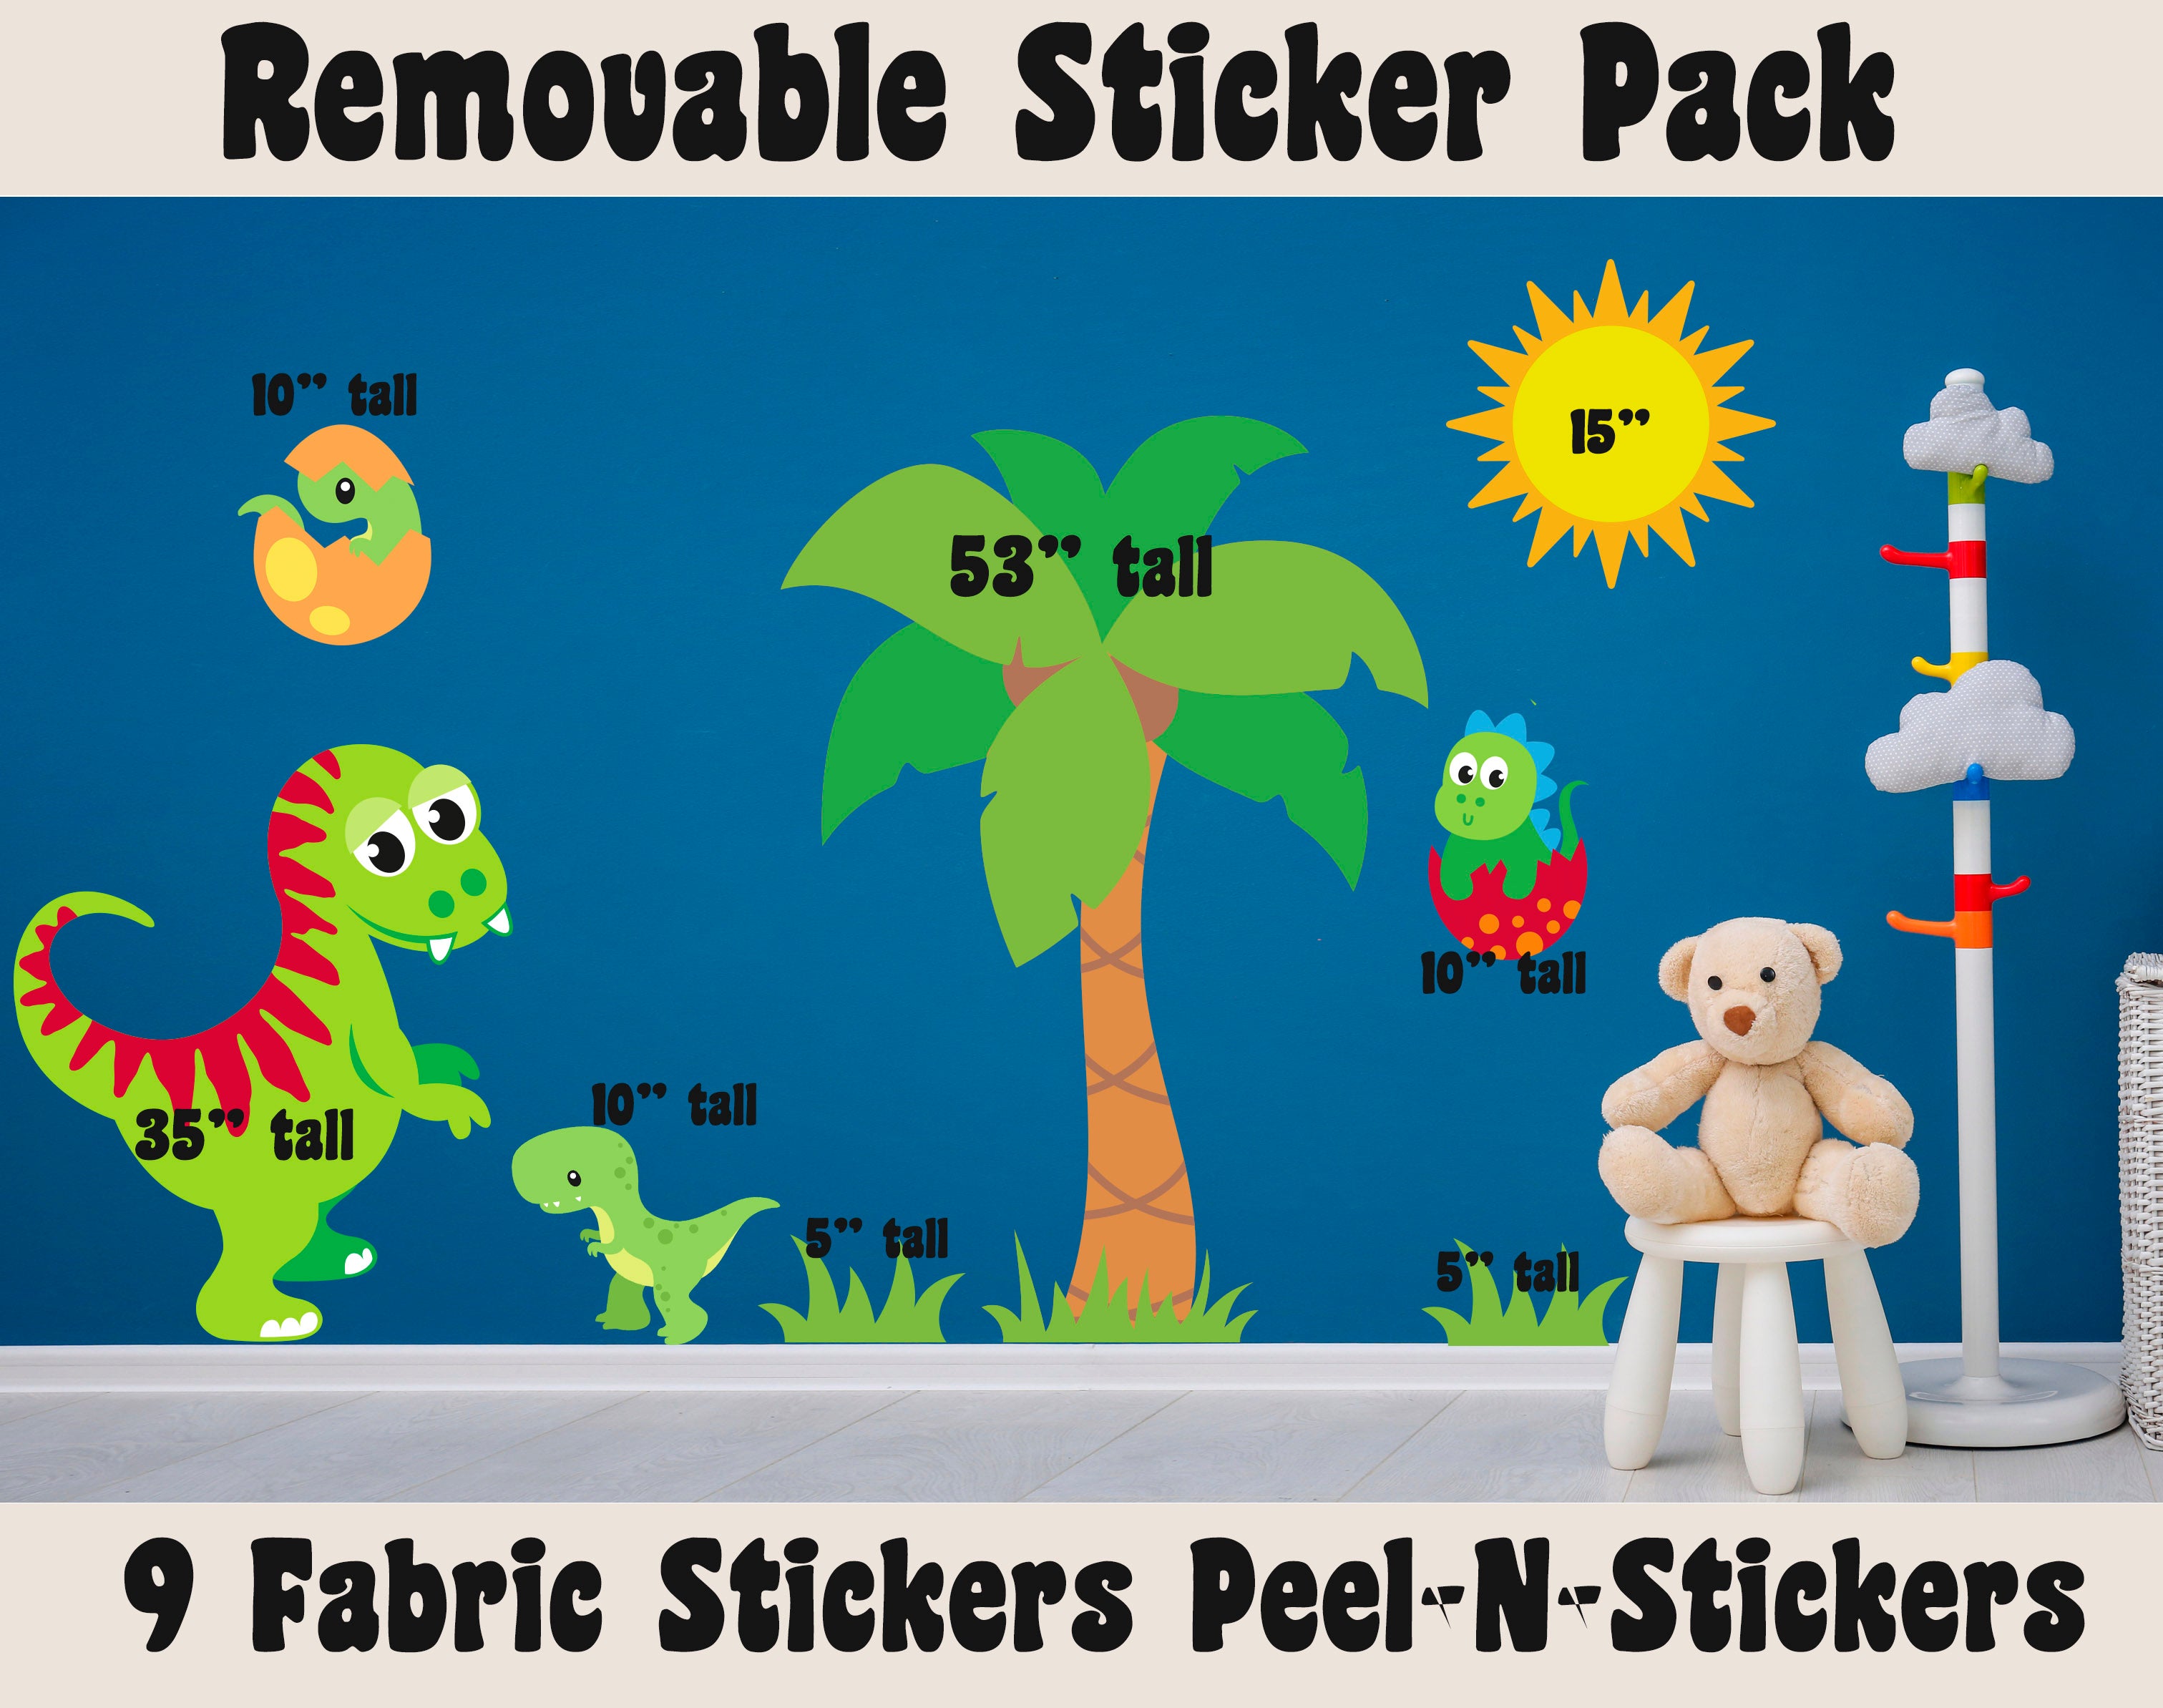 Large Dinosaur Sticker Sticker Packs, Wall Decal Sticker, Removable with NO wall Damage!